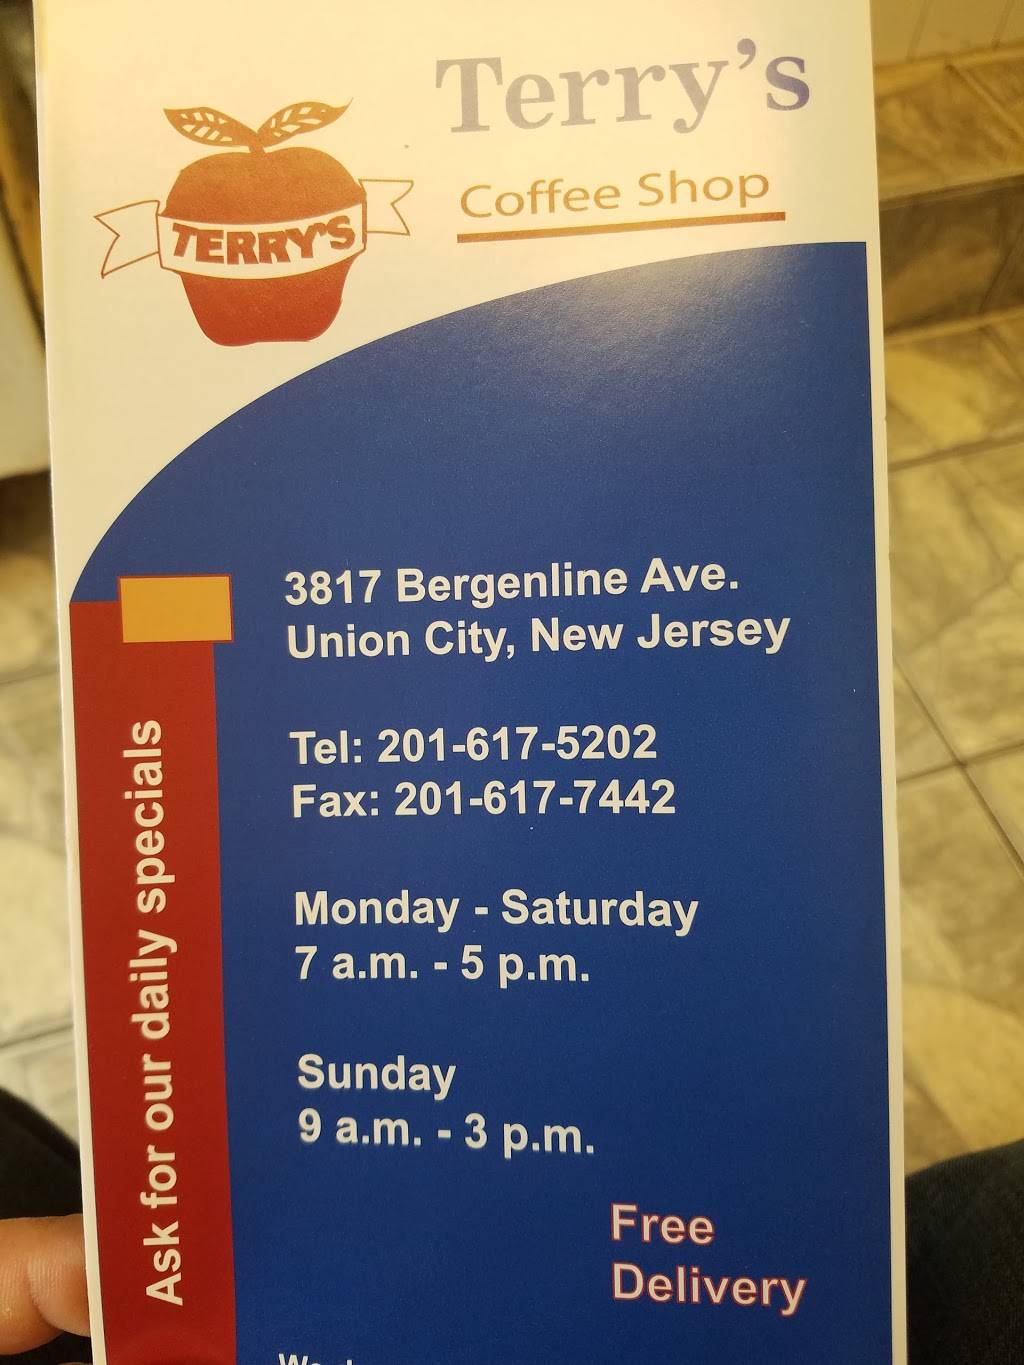 Terrys Coffee Shop | cafe | 3817 Bergenline Ave, Union City, NJ 07087, USA | 2016175202 OR +1 201-617-5202